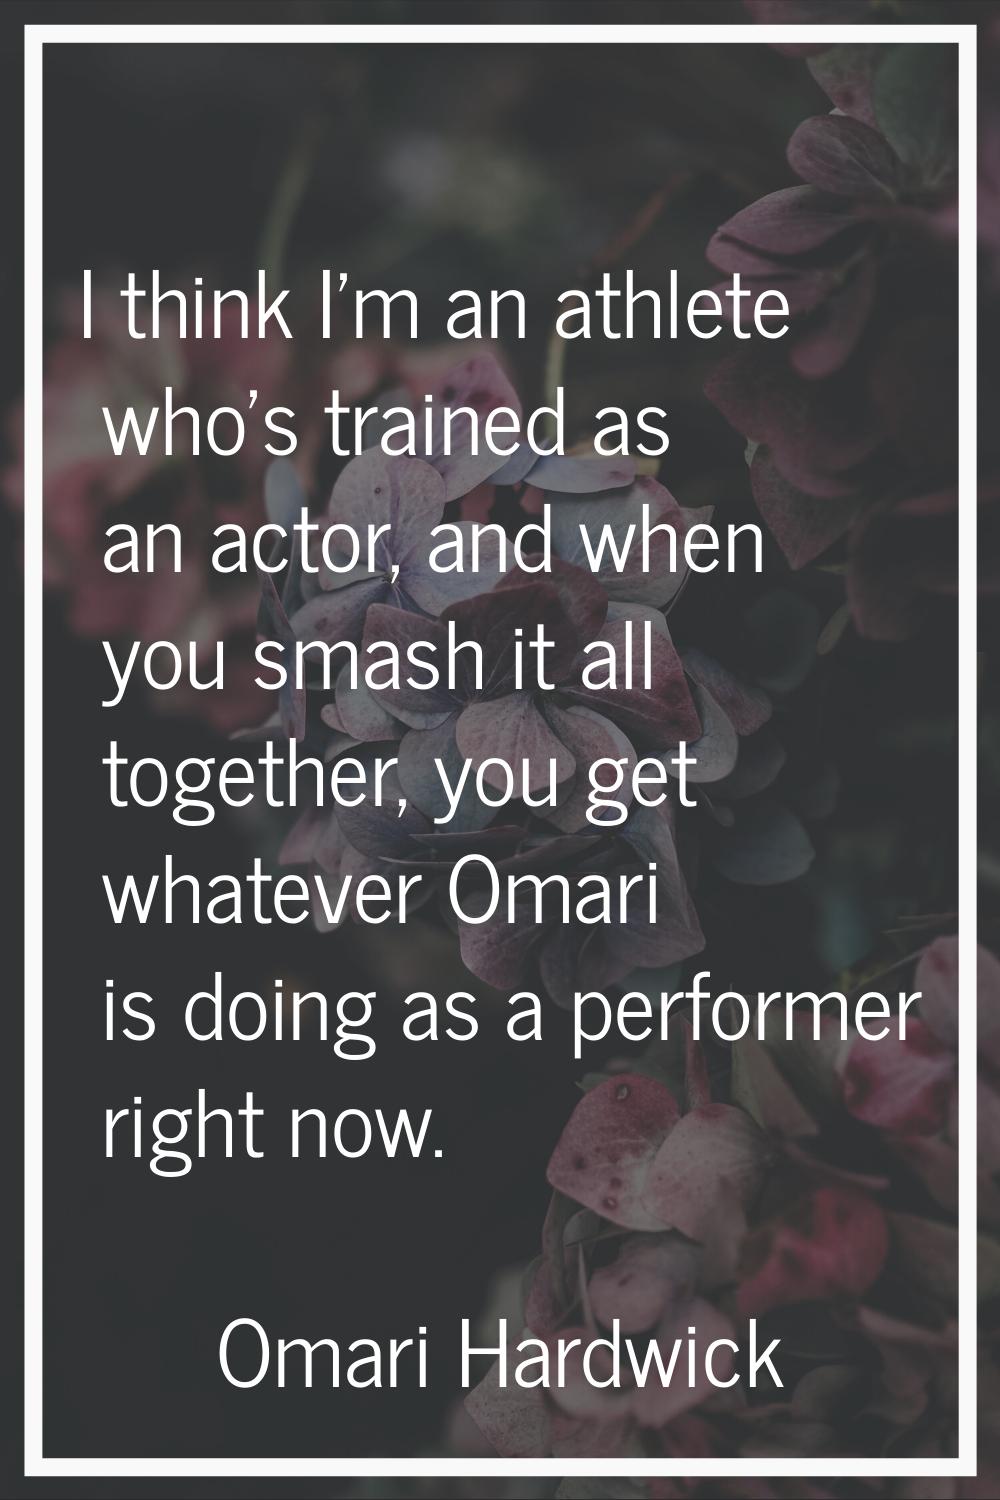 I think I'm an athlete who's trained as an actor, and when you smash it all together, you get whate